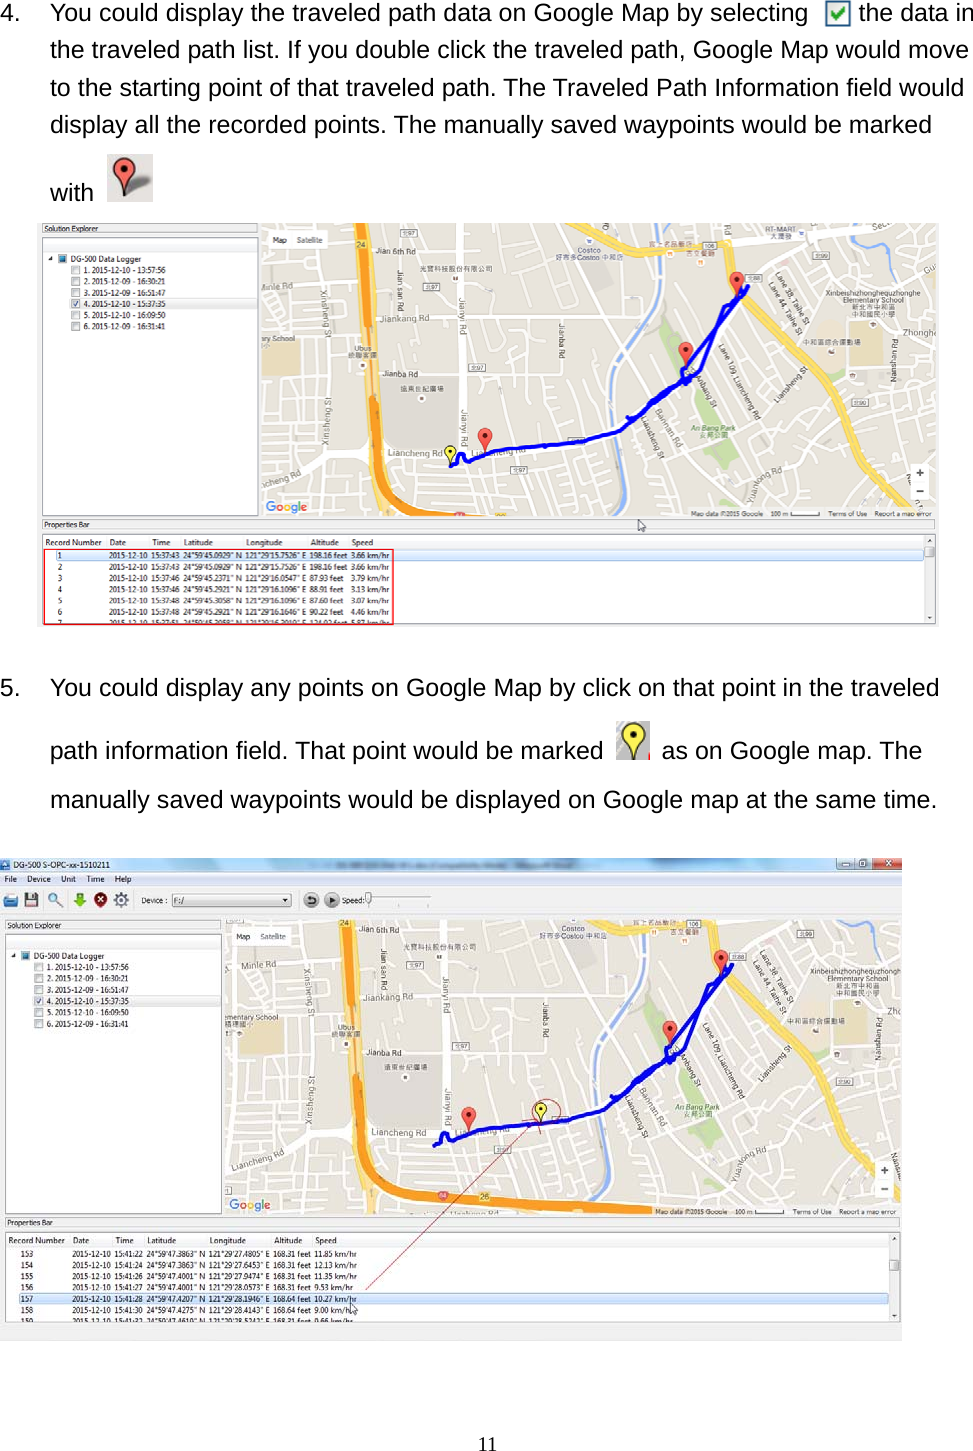  11 4.  You could display the traveled path data on Google Map by selecting        the data in the traveled path list. If you double click the traveled path, Google Map would move to the starting point of that traveled path. The Traveled Path Information field would display all the recorded points. The manually saved waypoints would be marked with     5.  You could display any points on Google Map by click on that point in the traveled path information field. That point would be marked    as on Google map. The manually saved waypoints would be displayed on Google map at the same time.      